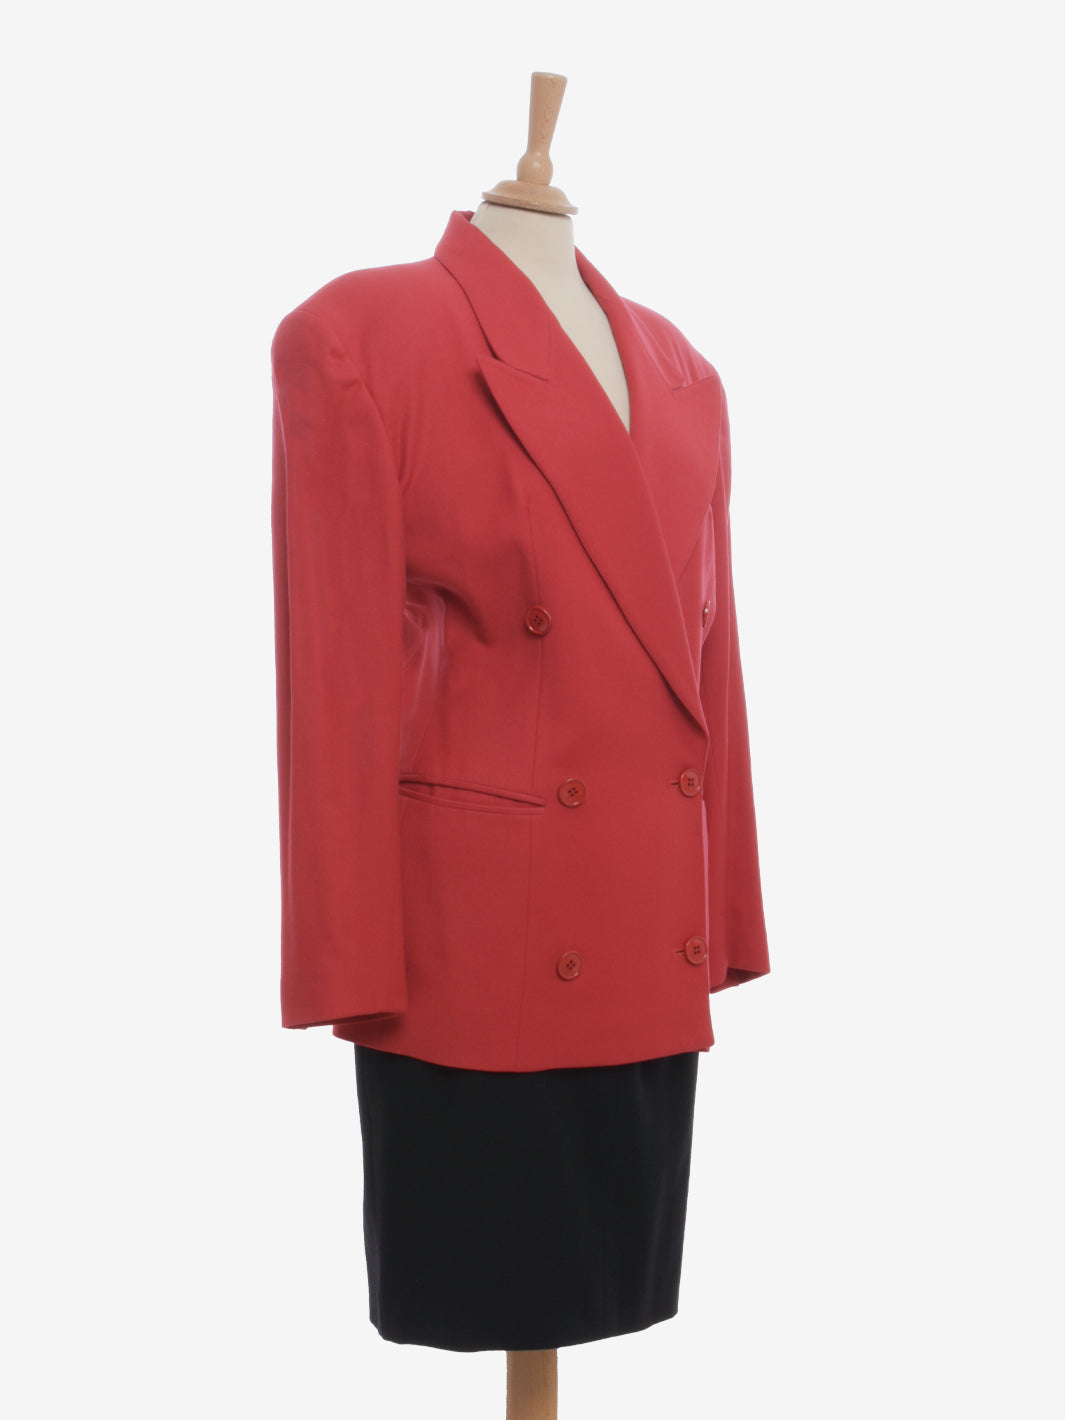 Gianfranco Ferré Wool Suit With Scarf - 80s